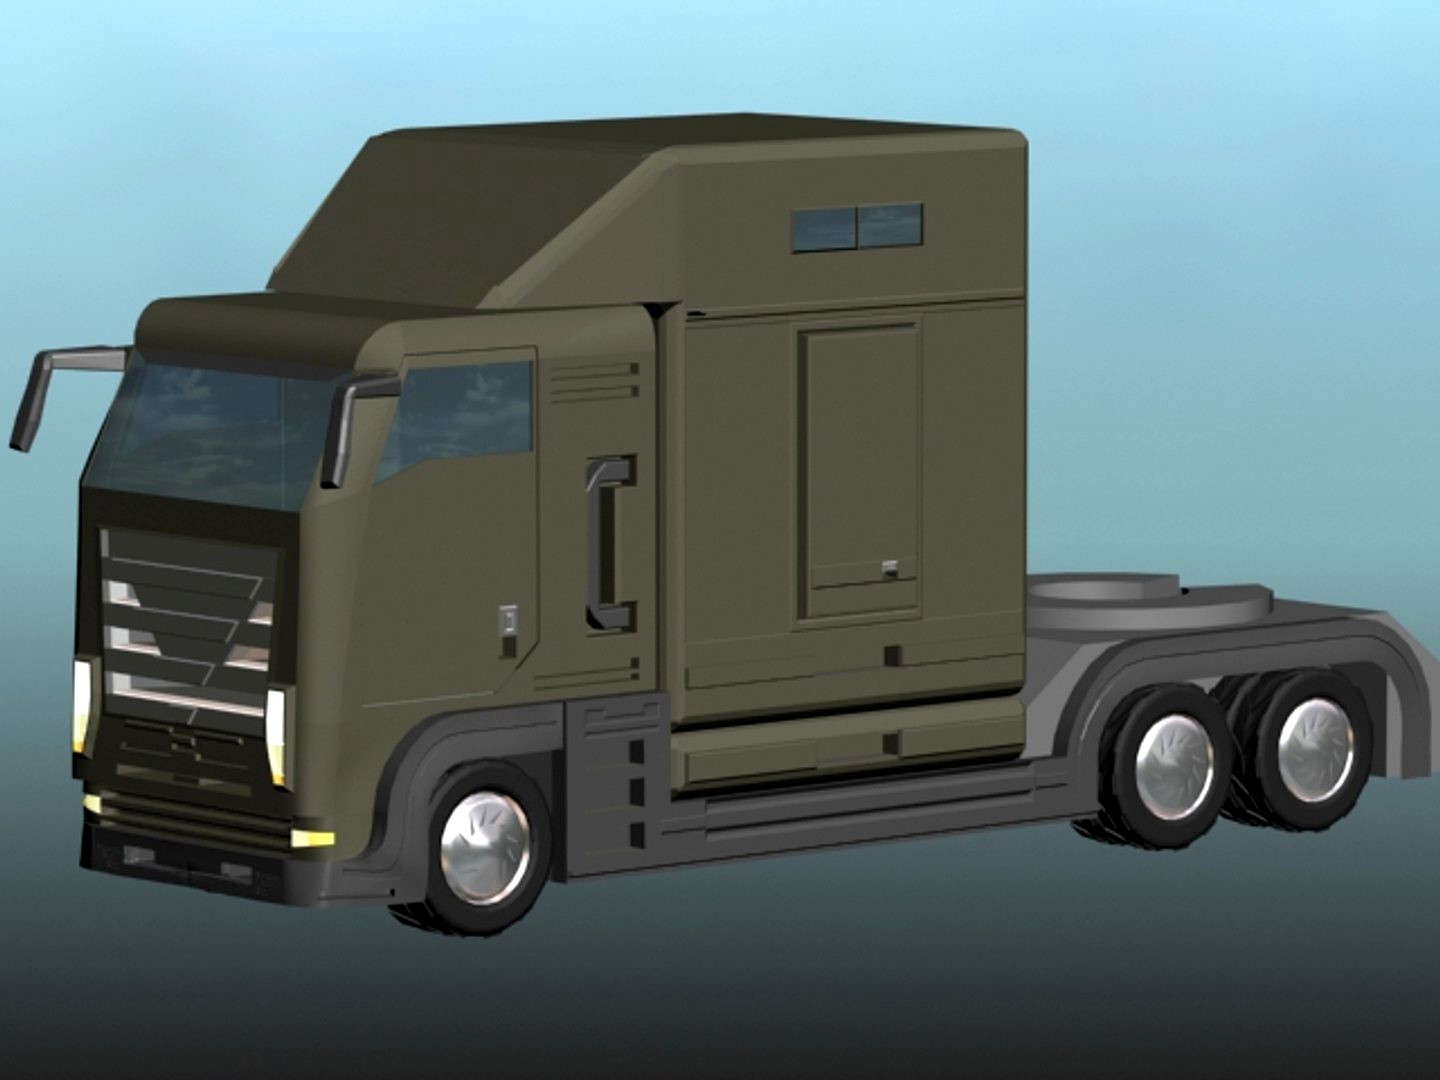 Just a Truck (Own 2nd concept)